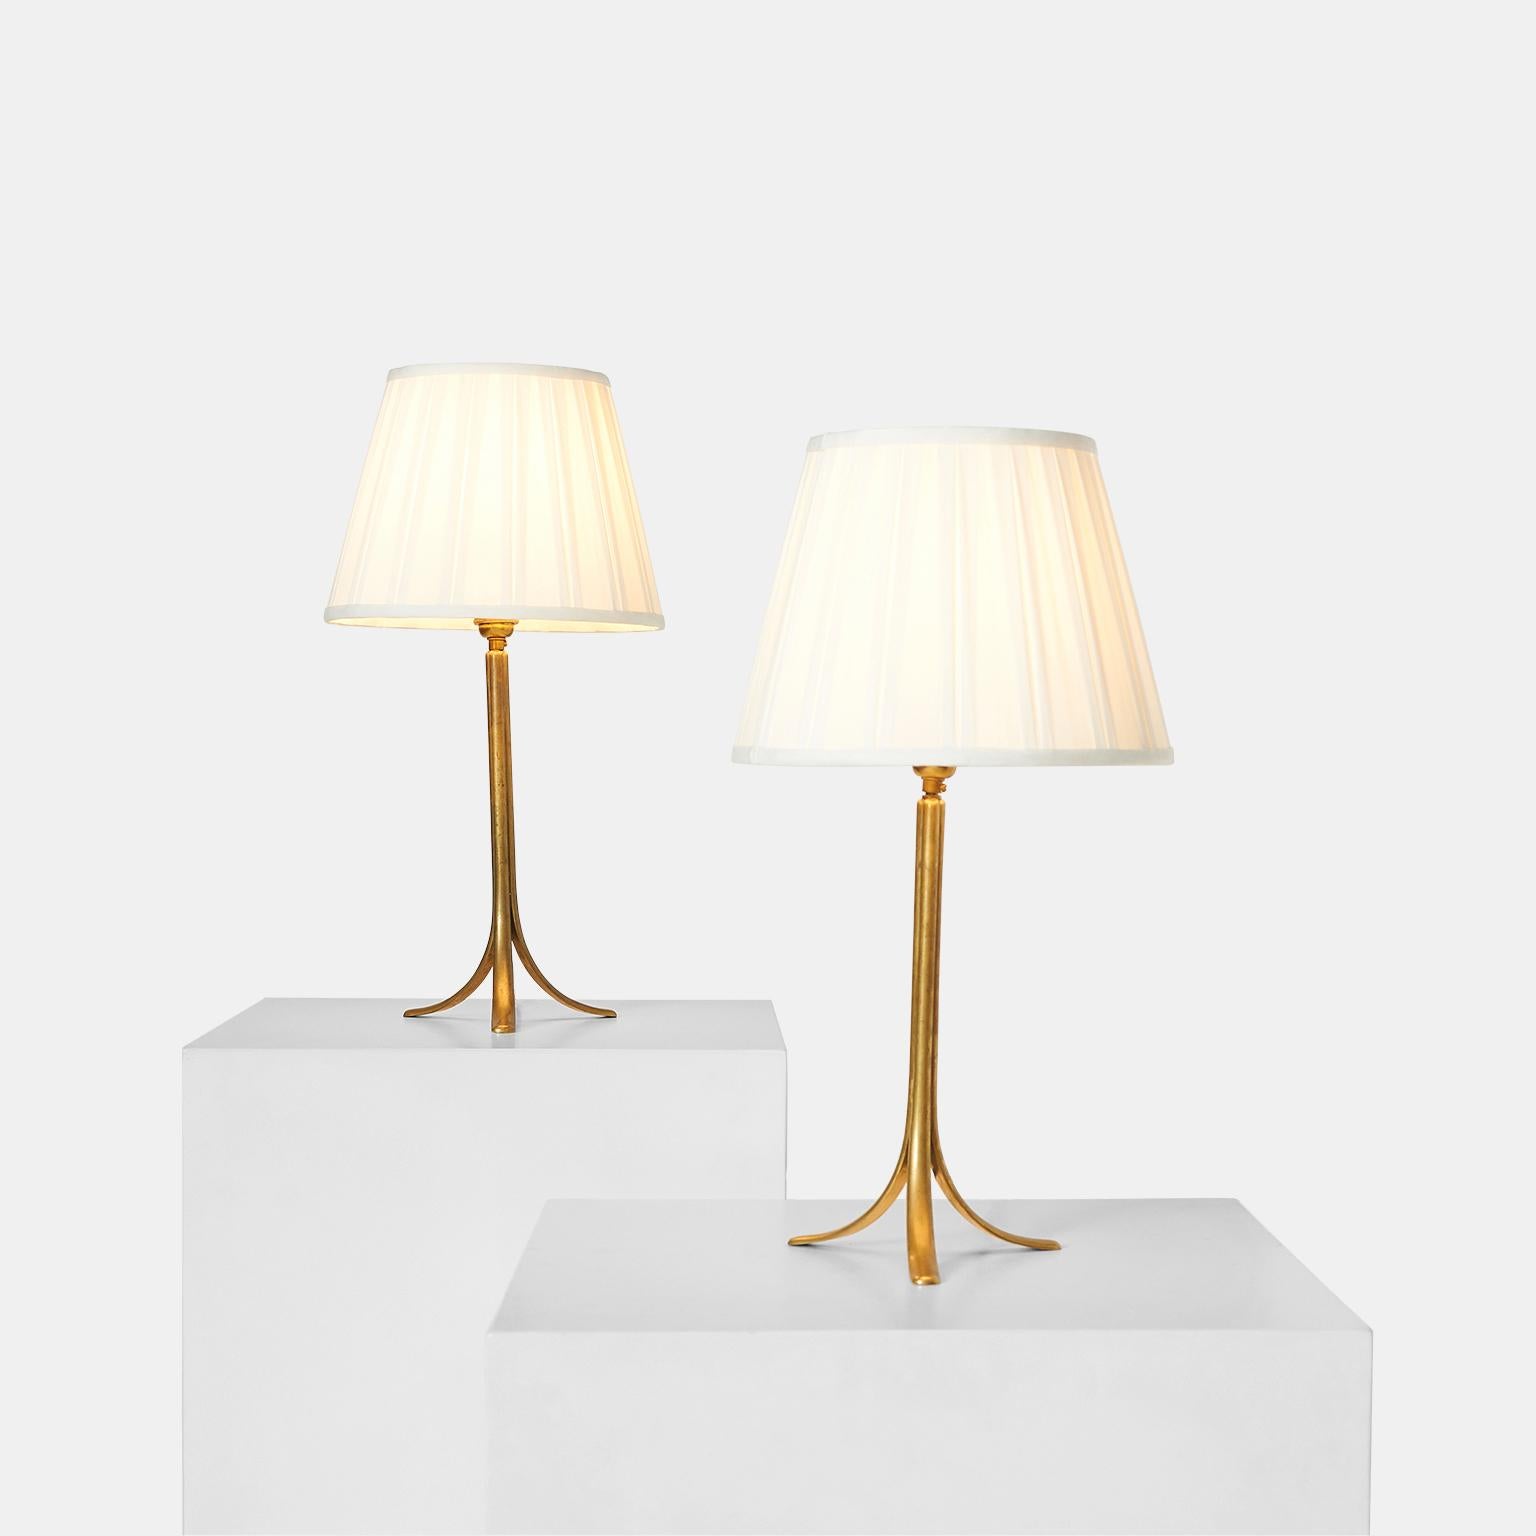 A table lamp made of cast brass, leg embossed Hagenauer Wien, WHW, made in Vienna, Austria.